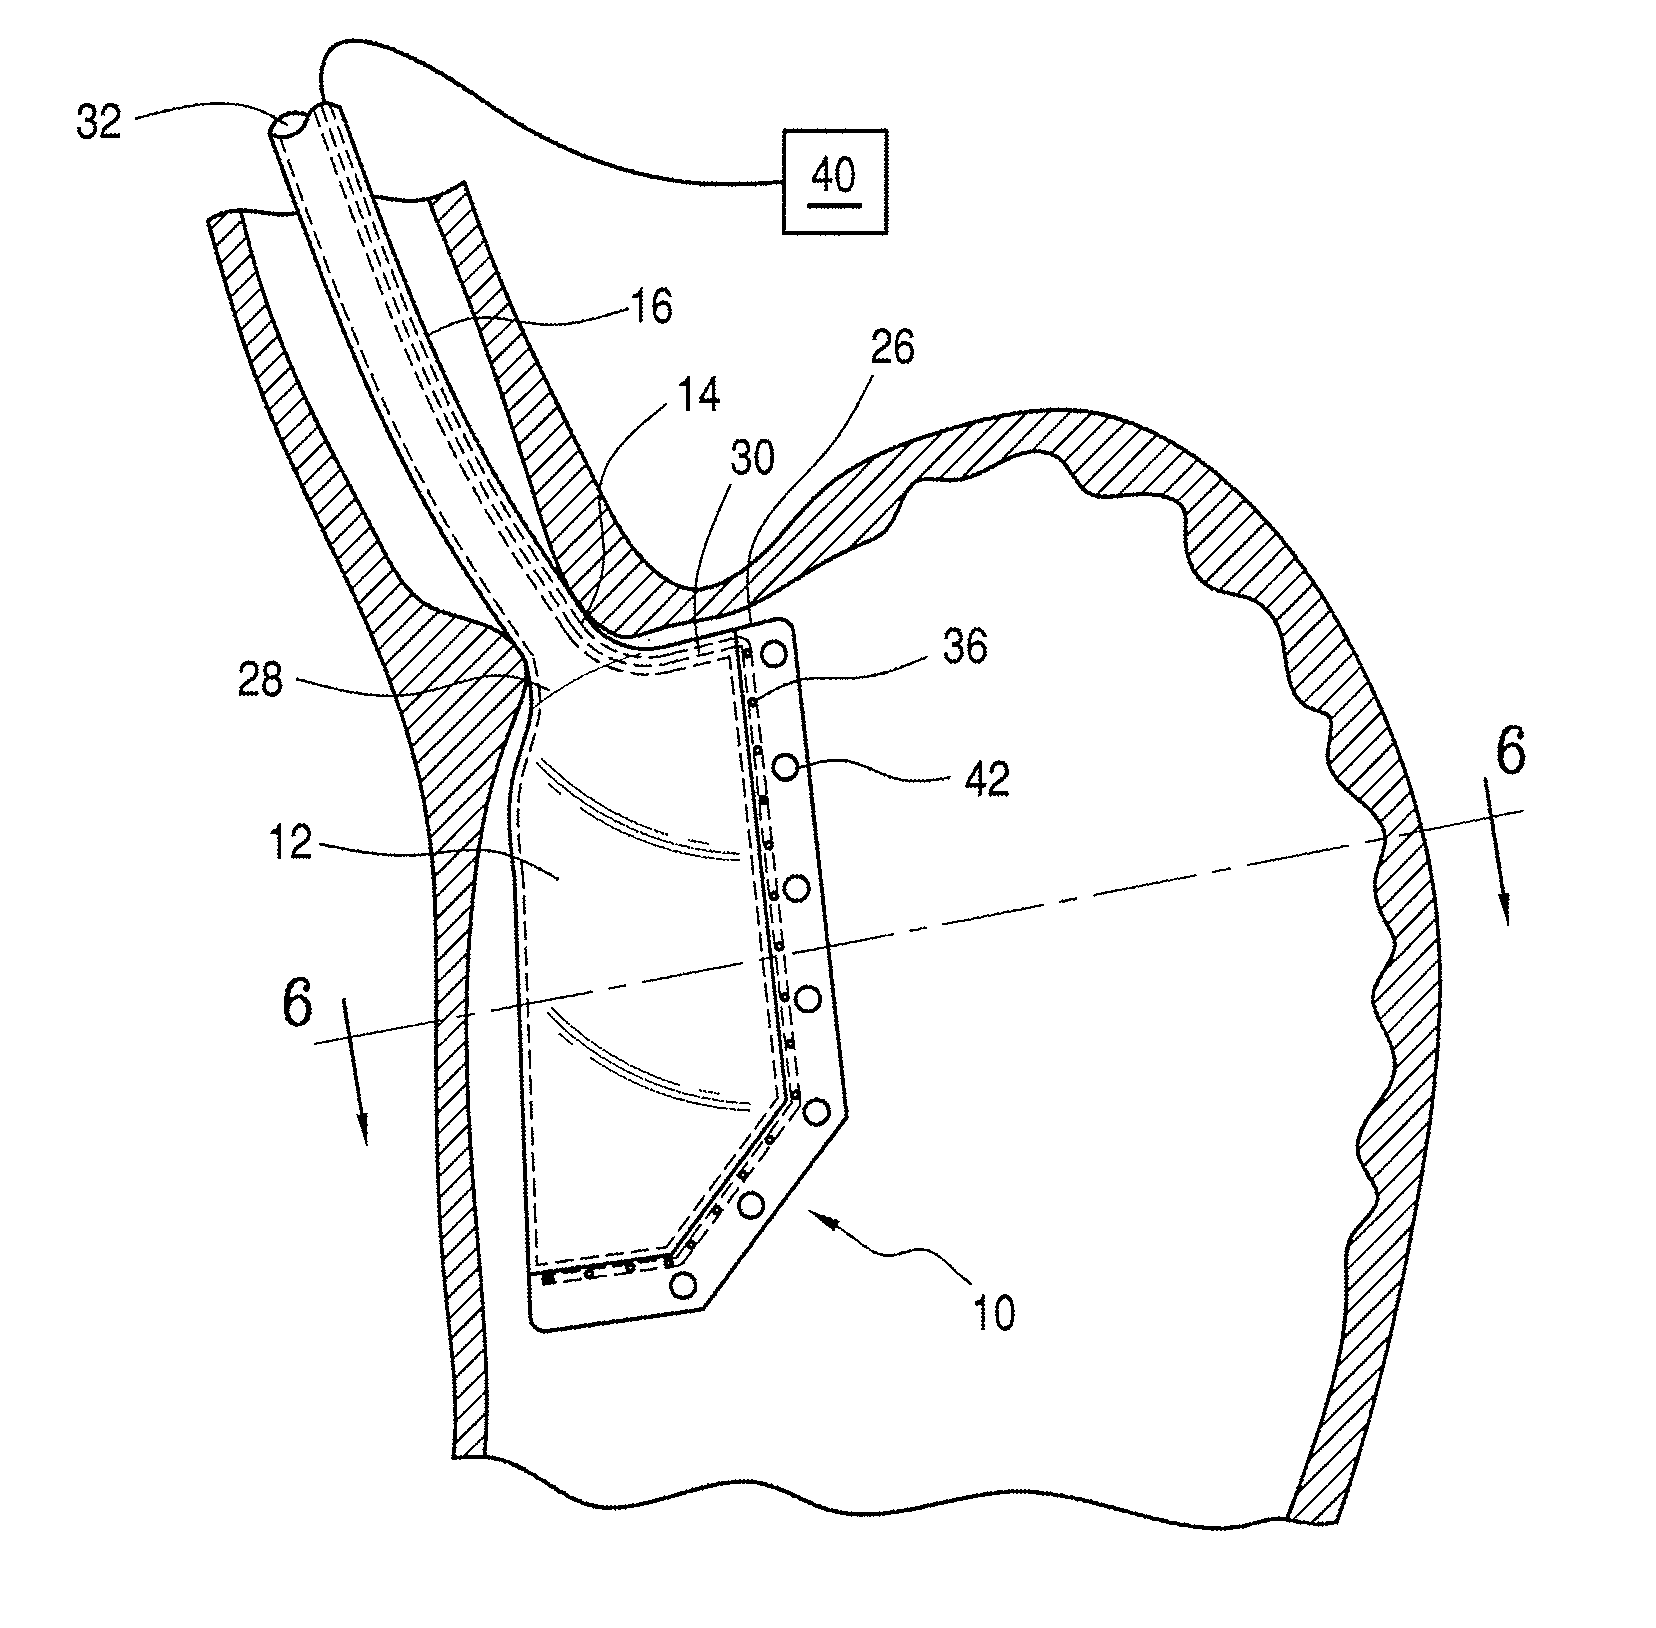 Method and apparatus for marking a lumenal wall